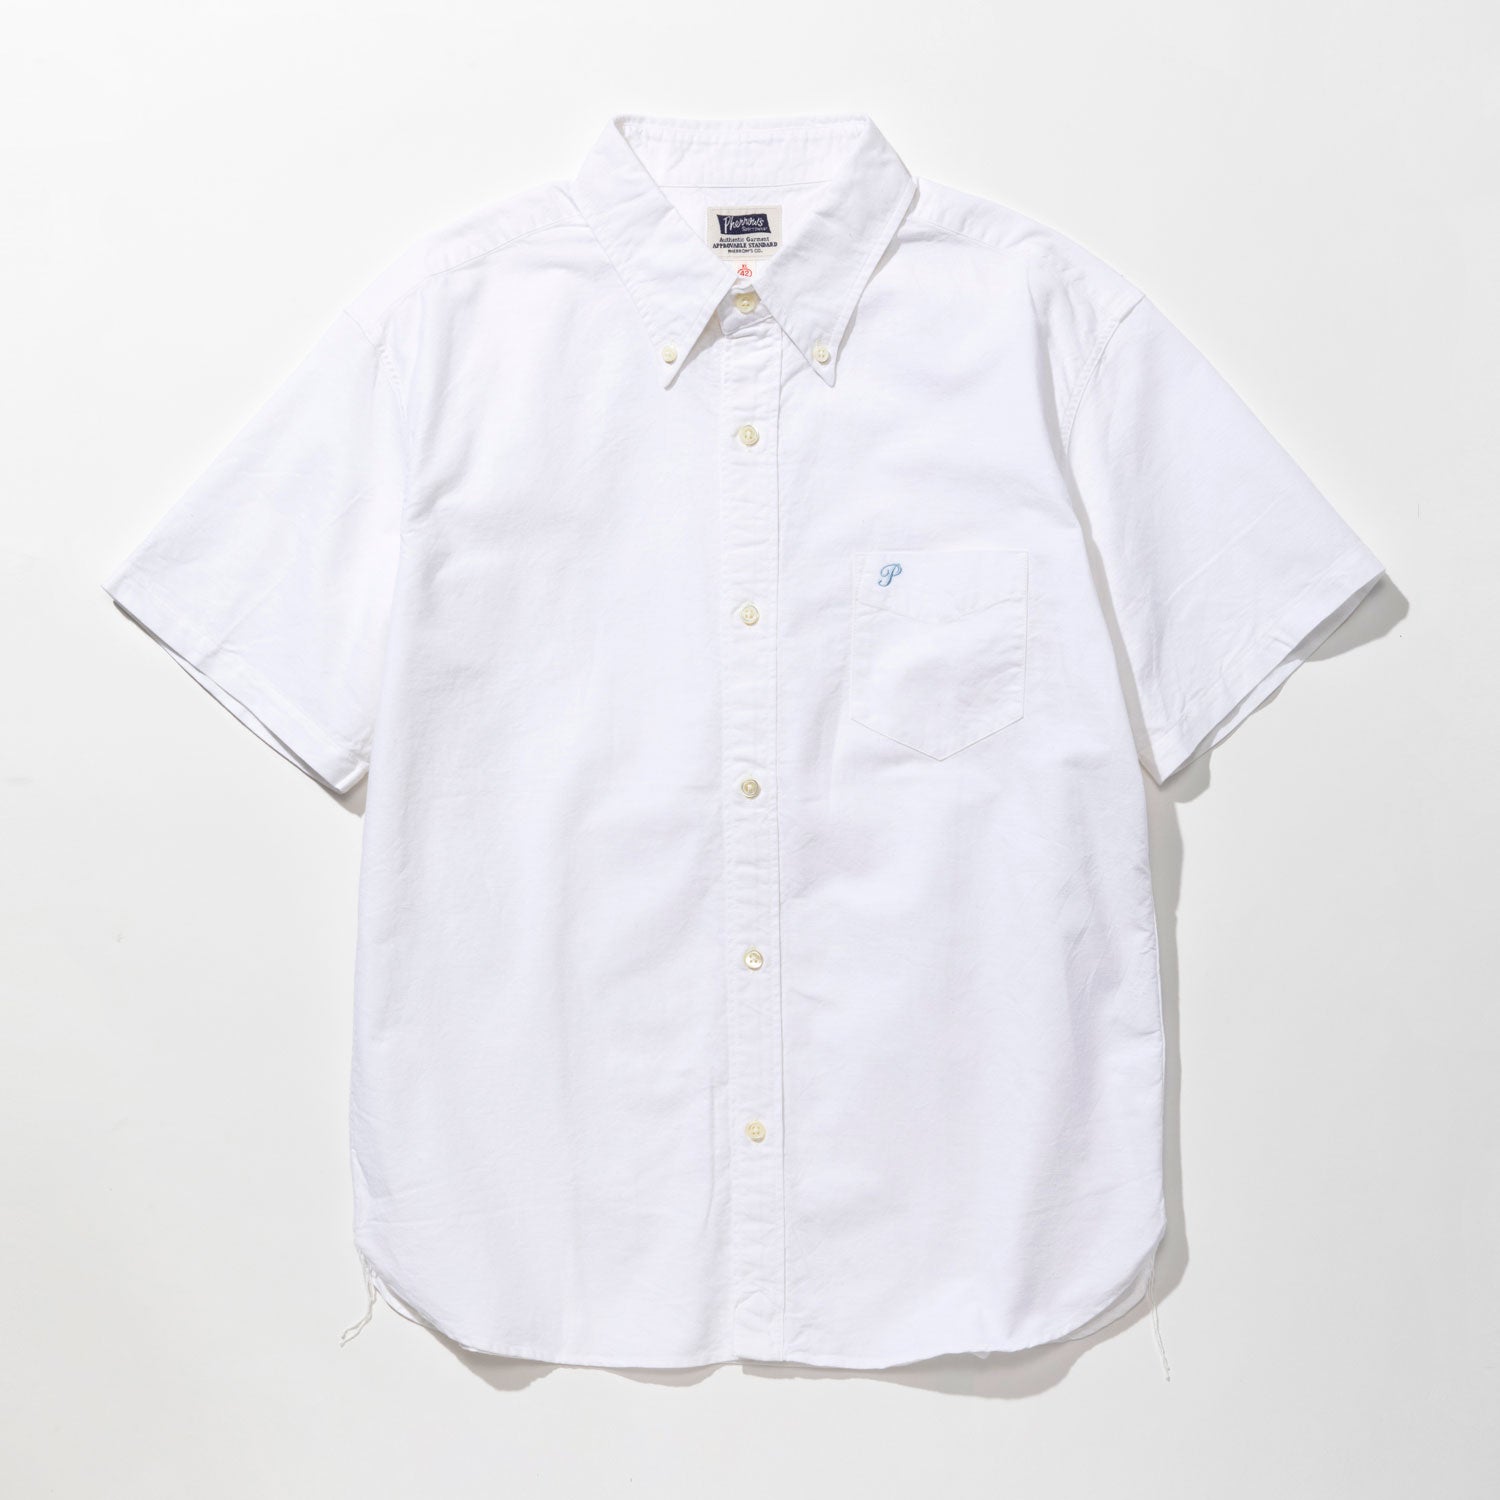 Fellowes PHERROW'S short-sleeved button-down shirt Oxford S/S BUTTON-DOWN SHIRTS PBDS1